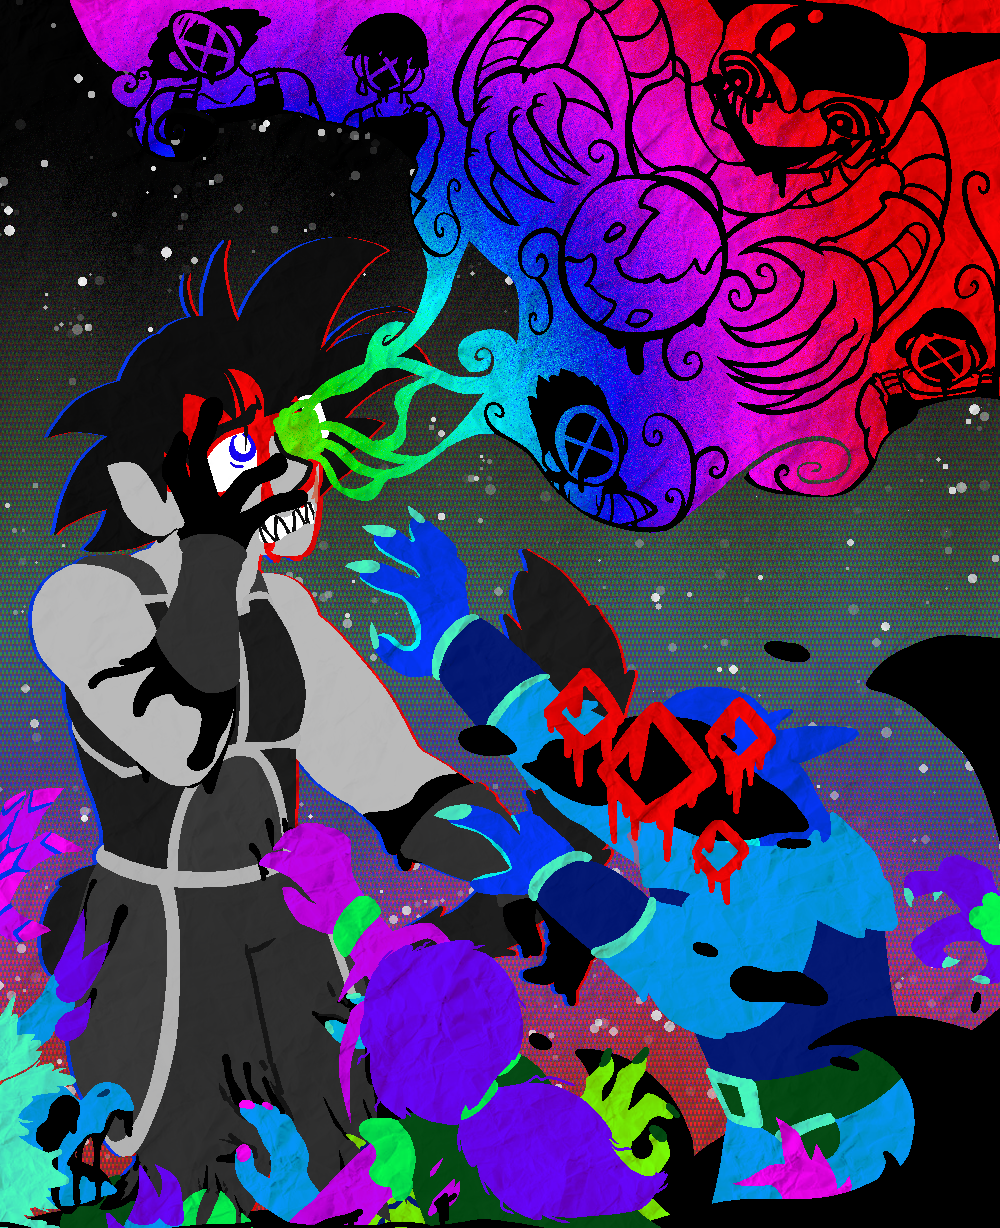 a grayscale bardock standing in a tide of black blood, his hands covered in the stuff. rising around him are brightly-colored zombies of the many different alien species he helped genocide, clutching at his pantlegs and leaving trails of blood where they touch. among these zombies is toolo the kanassan, who has grabbed bardock by the arm and is reaching upwards towards his face. toolo's own face is completely blanked out with crudely stylized red eyes overlaid. bardock himself is staring upwards with horror, however, blood pouring down his face (akin to his red headband) and staring at a rainbow-colored psychic vision that appears to be smoking out of his scouter. in this vision are all of his crew with their faces blanked out, along with a grotesquely stylized frieza looming over planet vegeta.